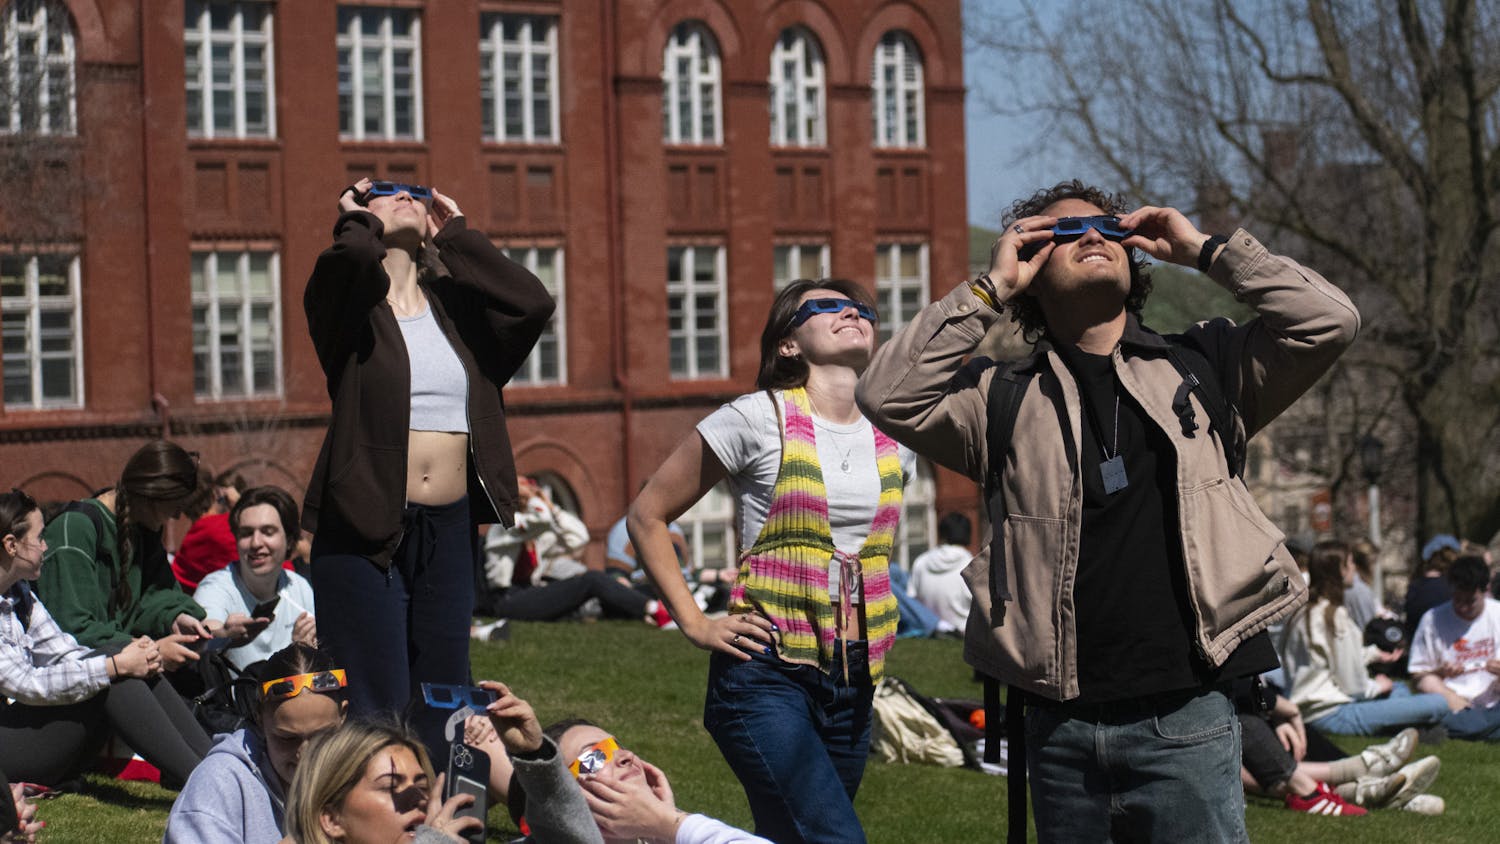 PHOTOS: See the solar eclipse from the UW-Madison perspective